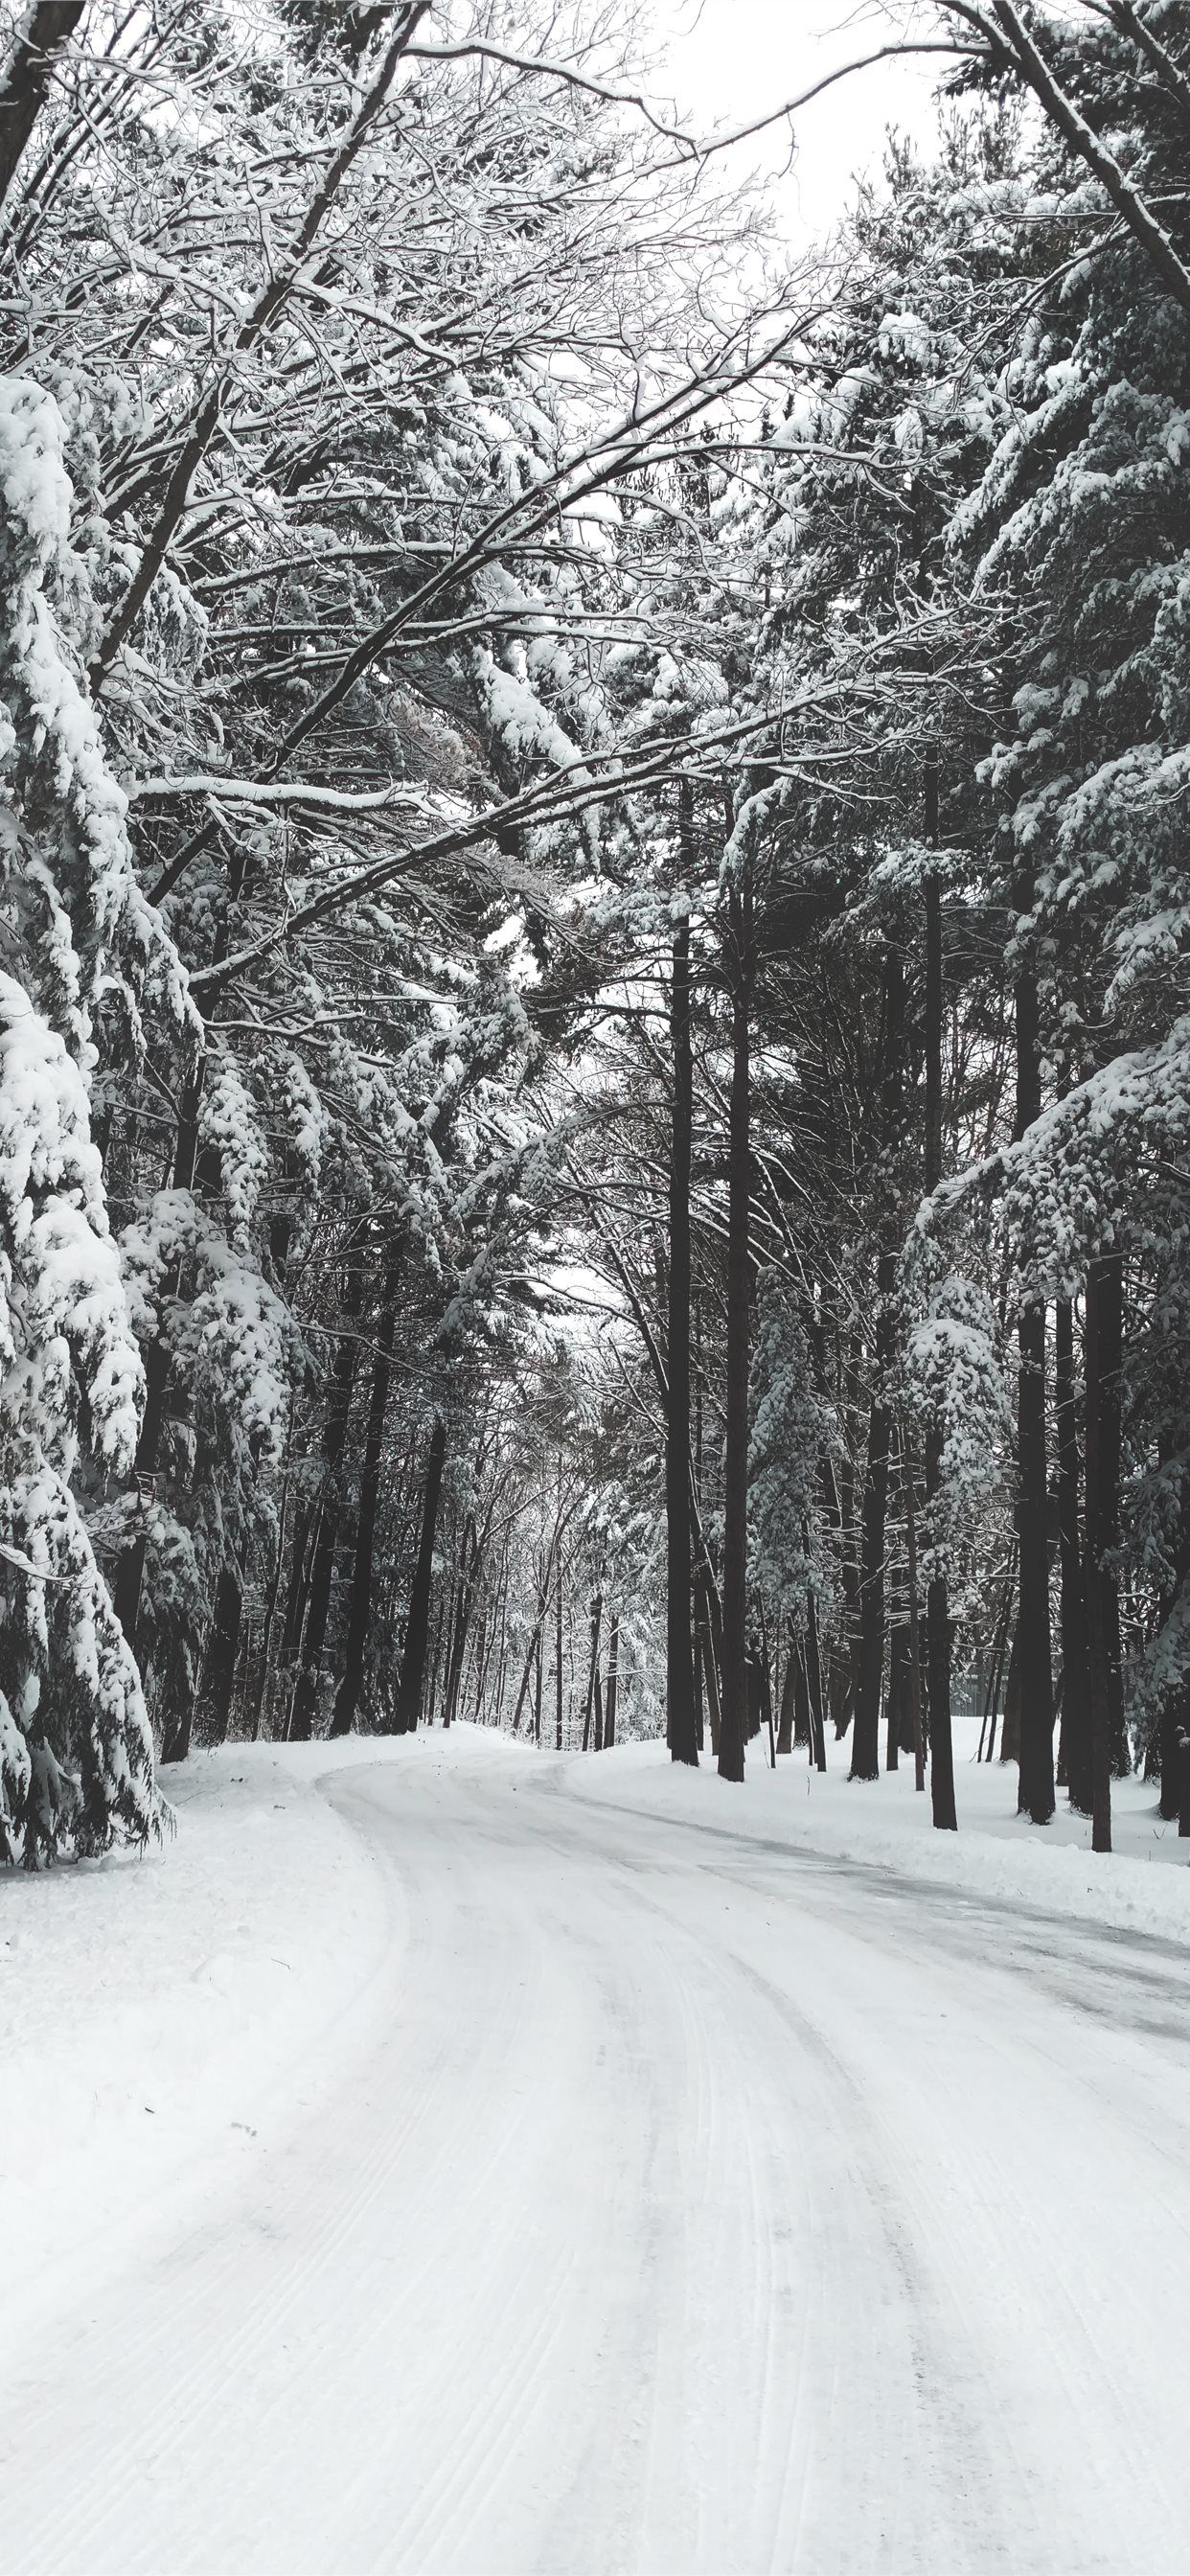 road surrounded by trees during winter iPhone Wallpaper Free Download